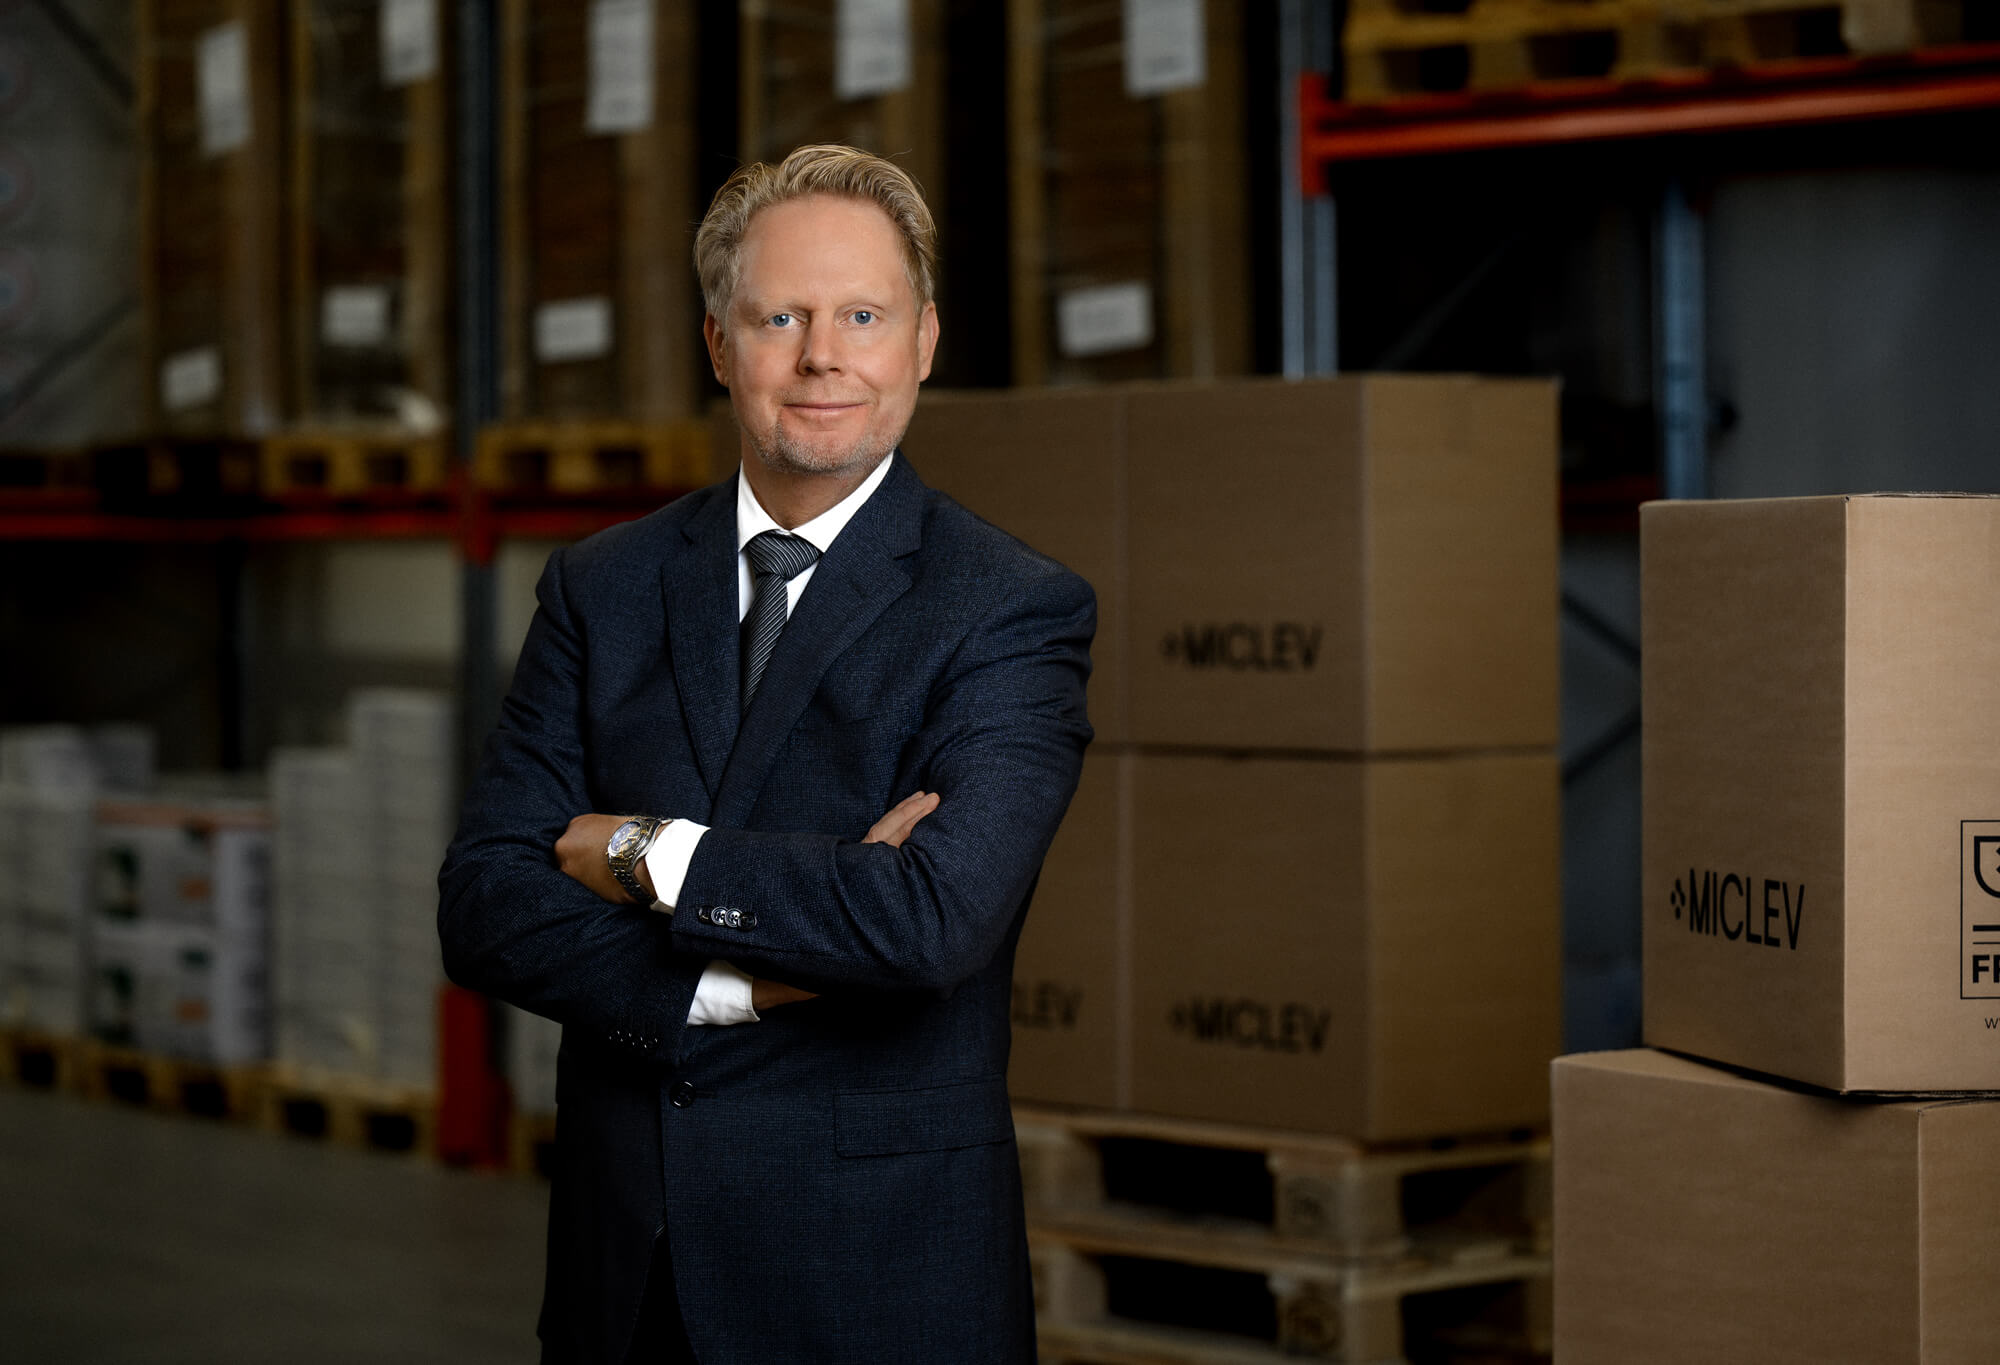 Portrait of Fredrik, CEO at MicLev. Image taken at MicLevs office.